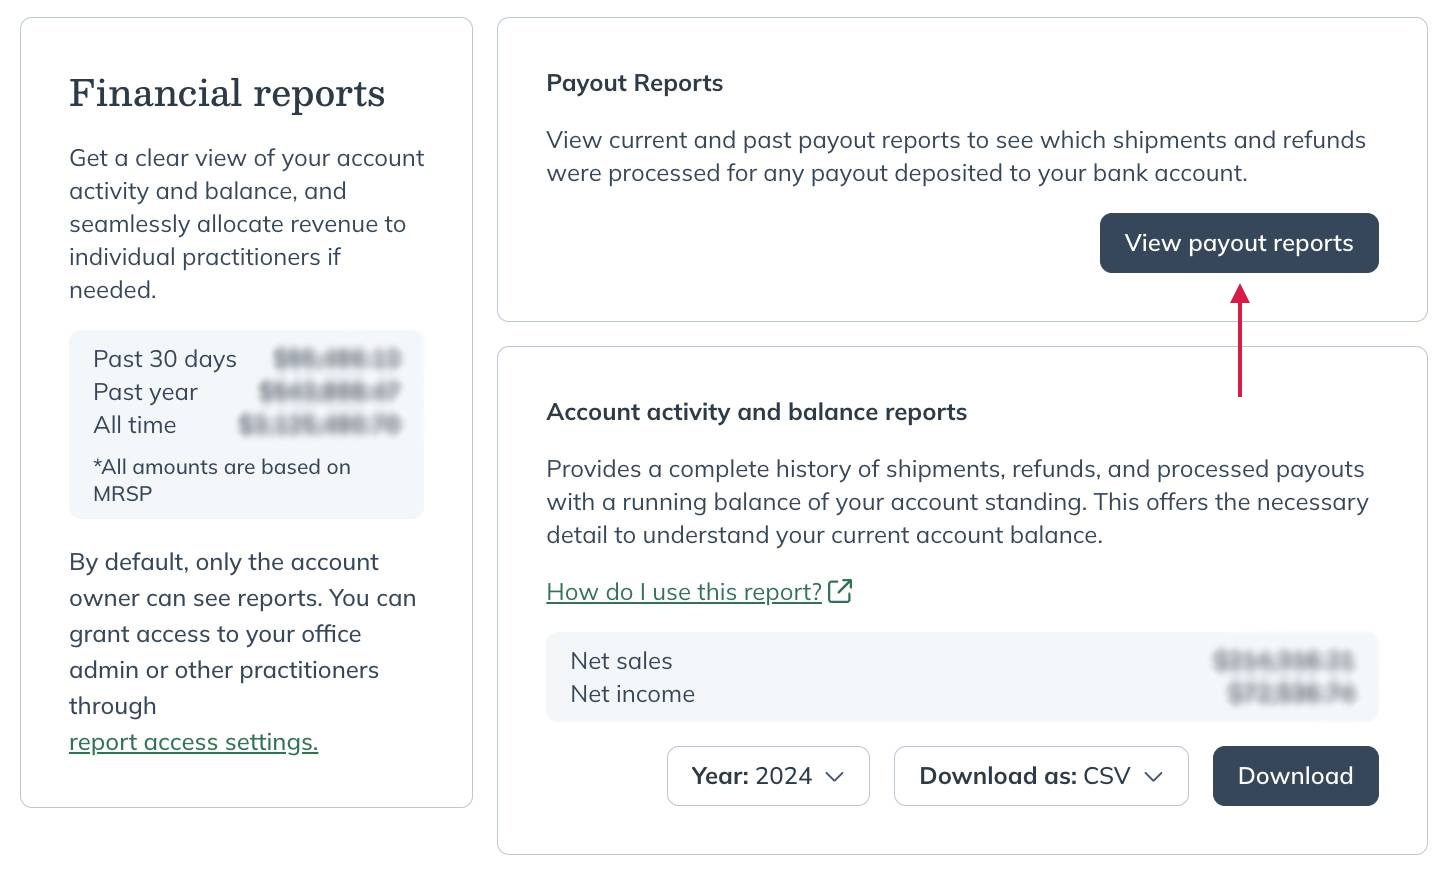 Selecting view payout reports